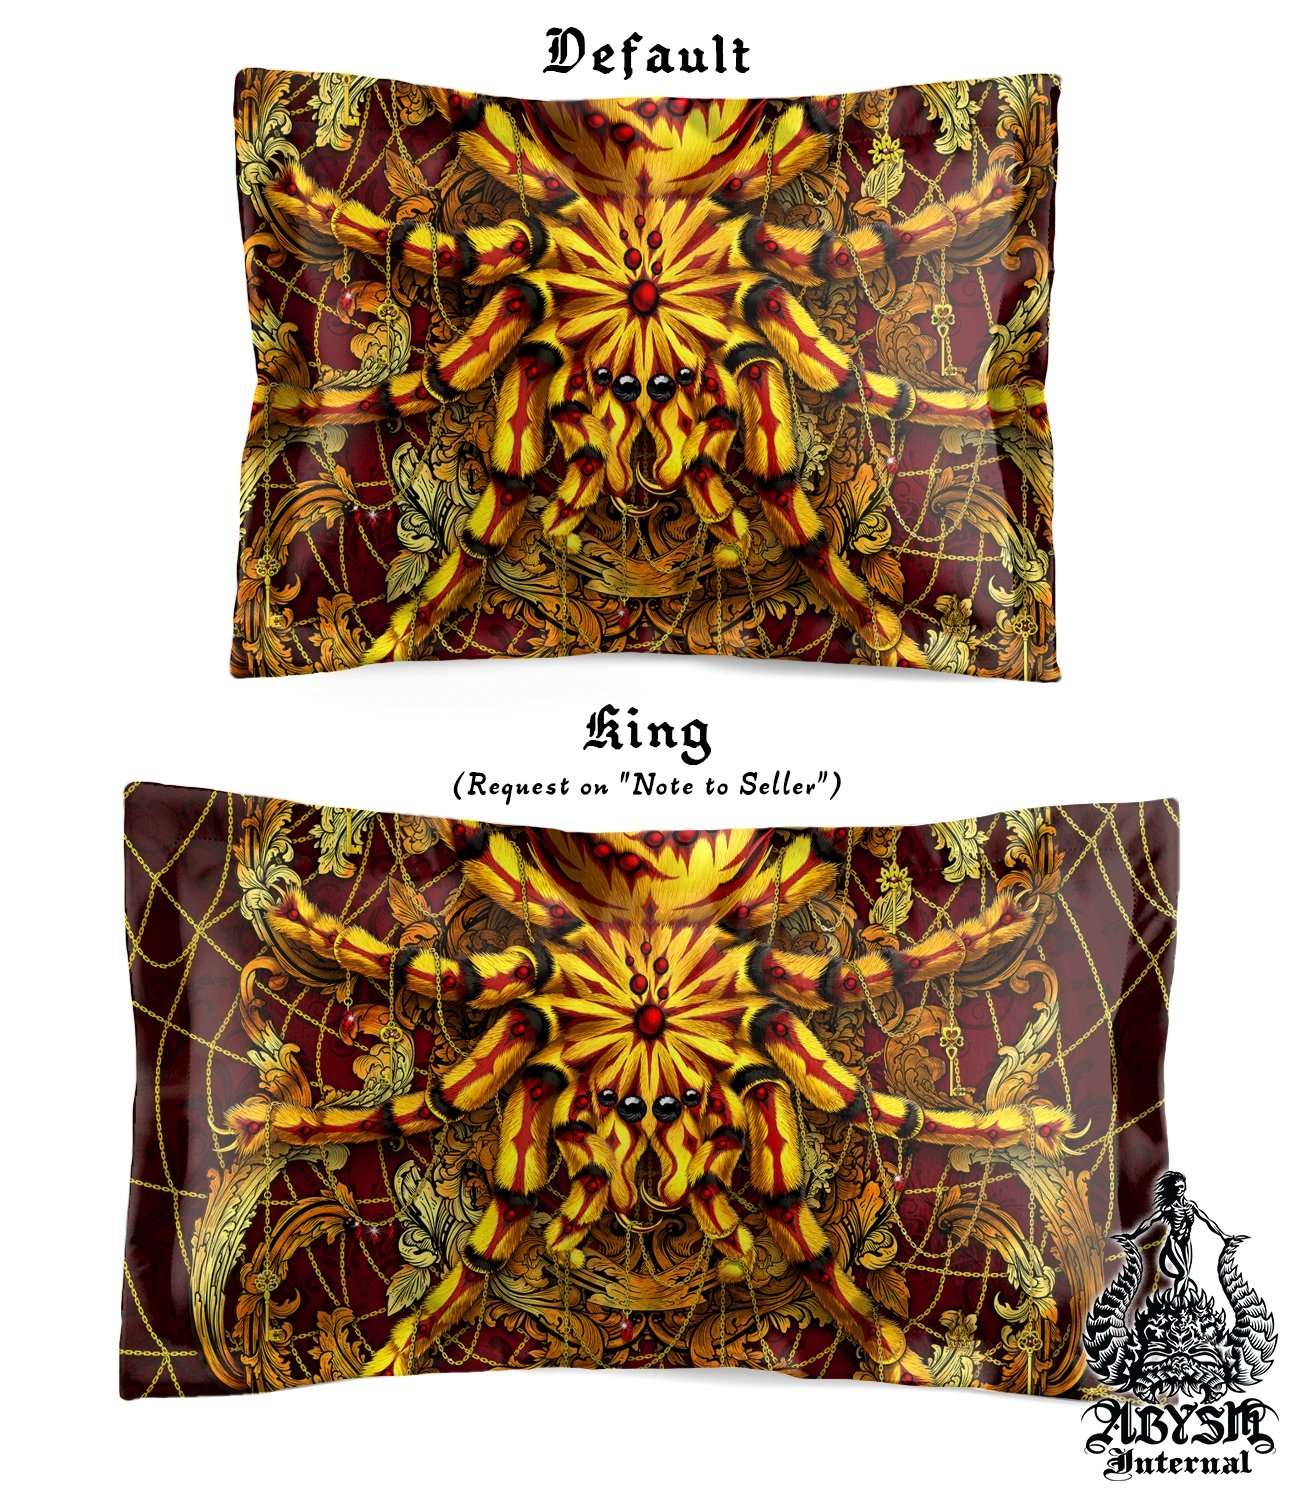 Spider Bedding Set, Comforter and Duvet, Bed Cover and Bedroom Decor, King, Queen and Twin Size - Tarantula Gold Red - Abysm Internal